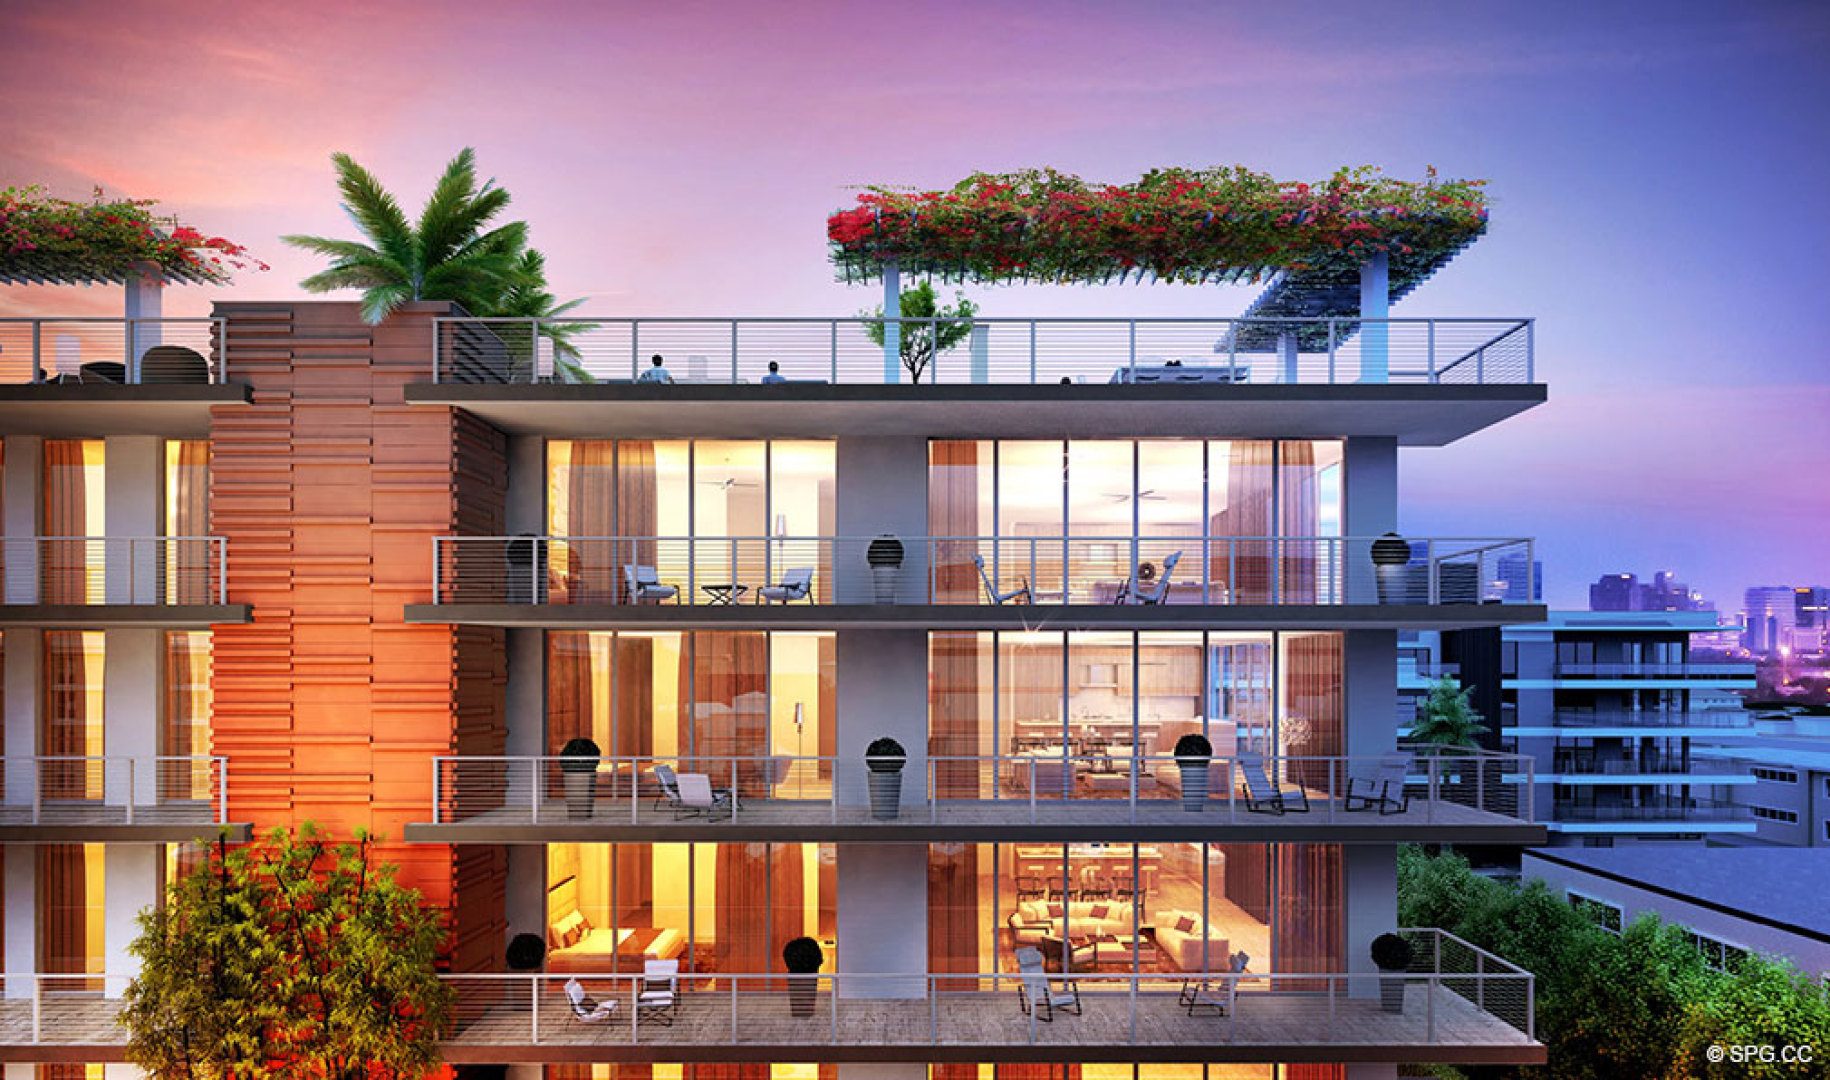 Floor to Ceiling Glass Residences at AquaMar Las Olas, Luxury Waterfront Condos in Fort Lauderdale, Florida 33301